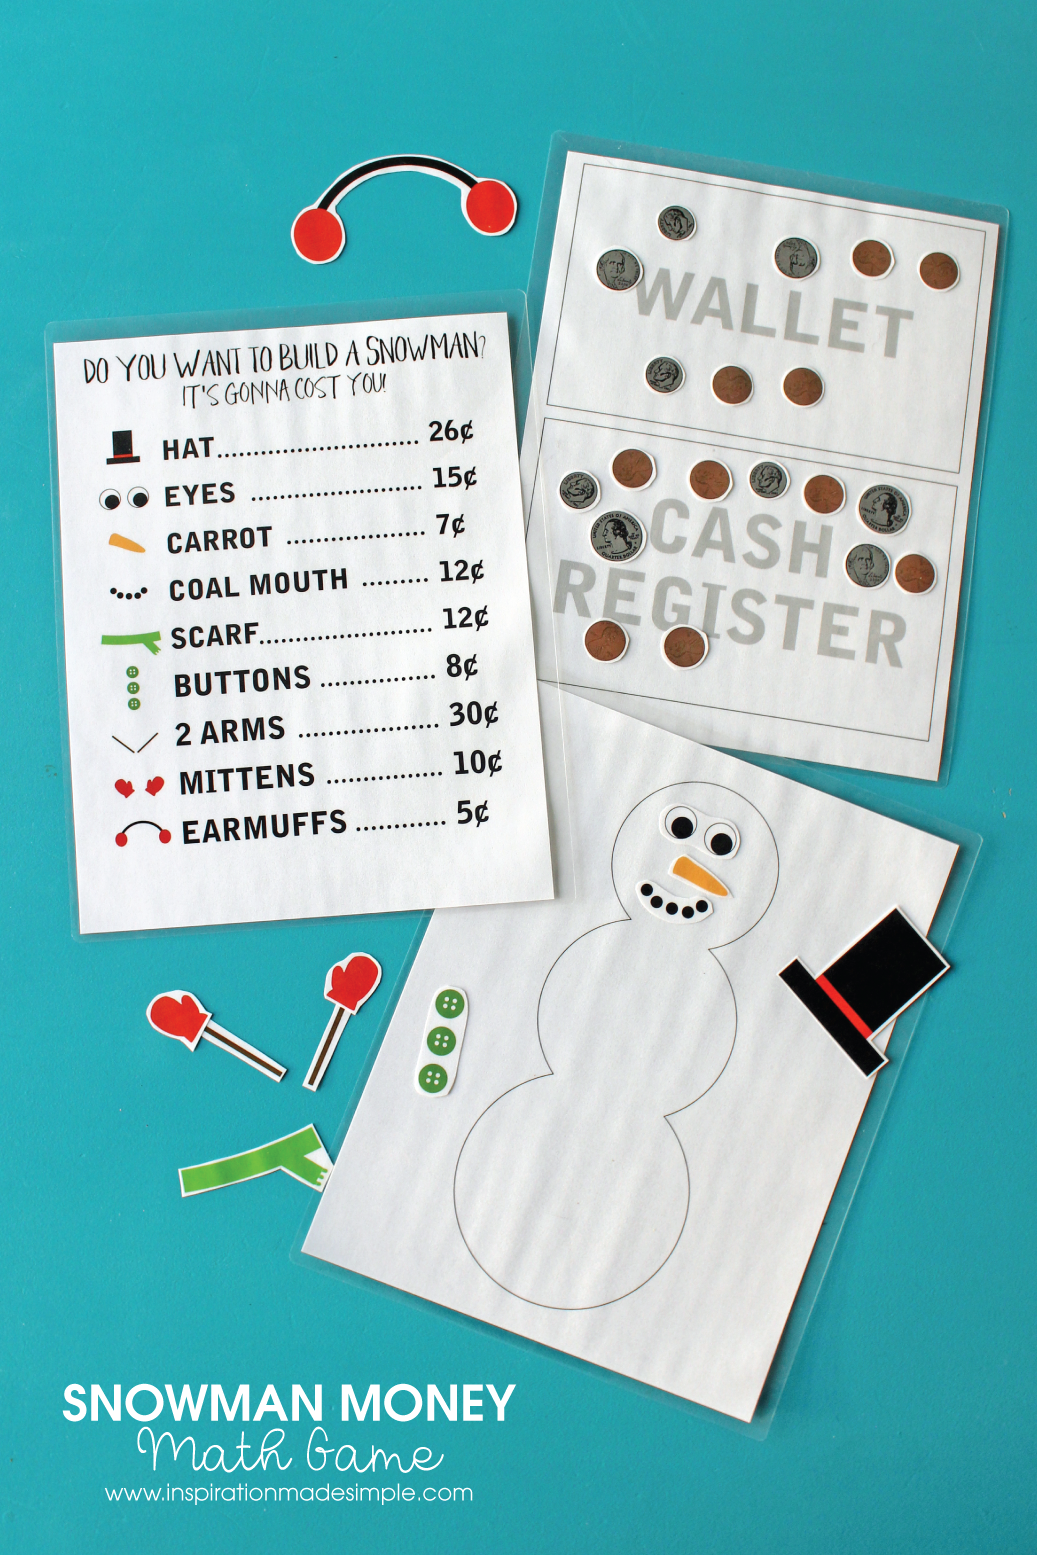 Snowman Money Math Game - great learning game for children learning US Currency